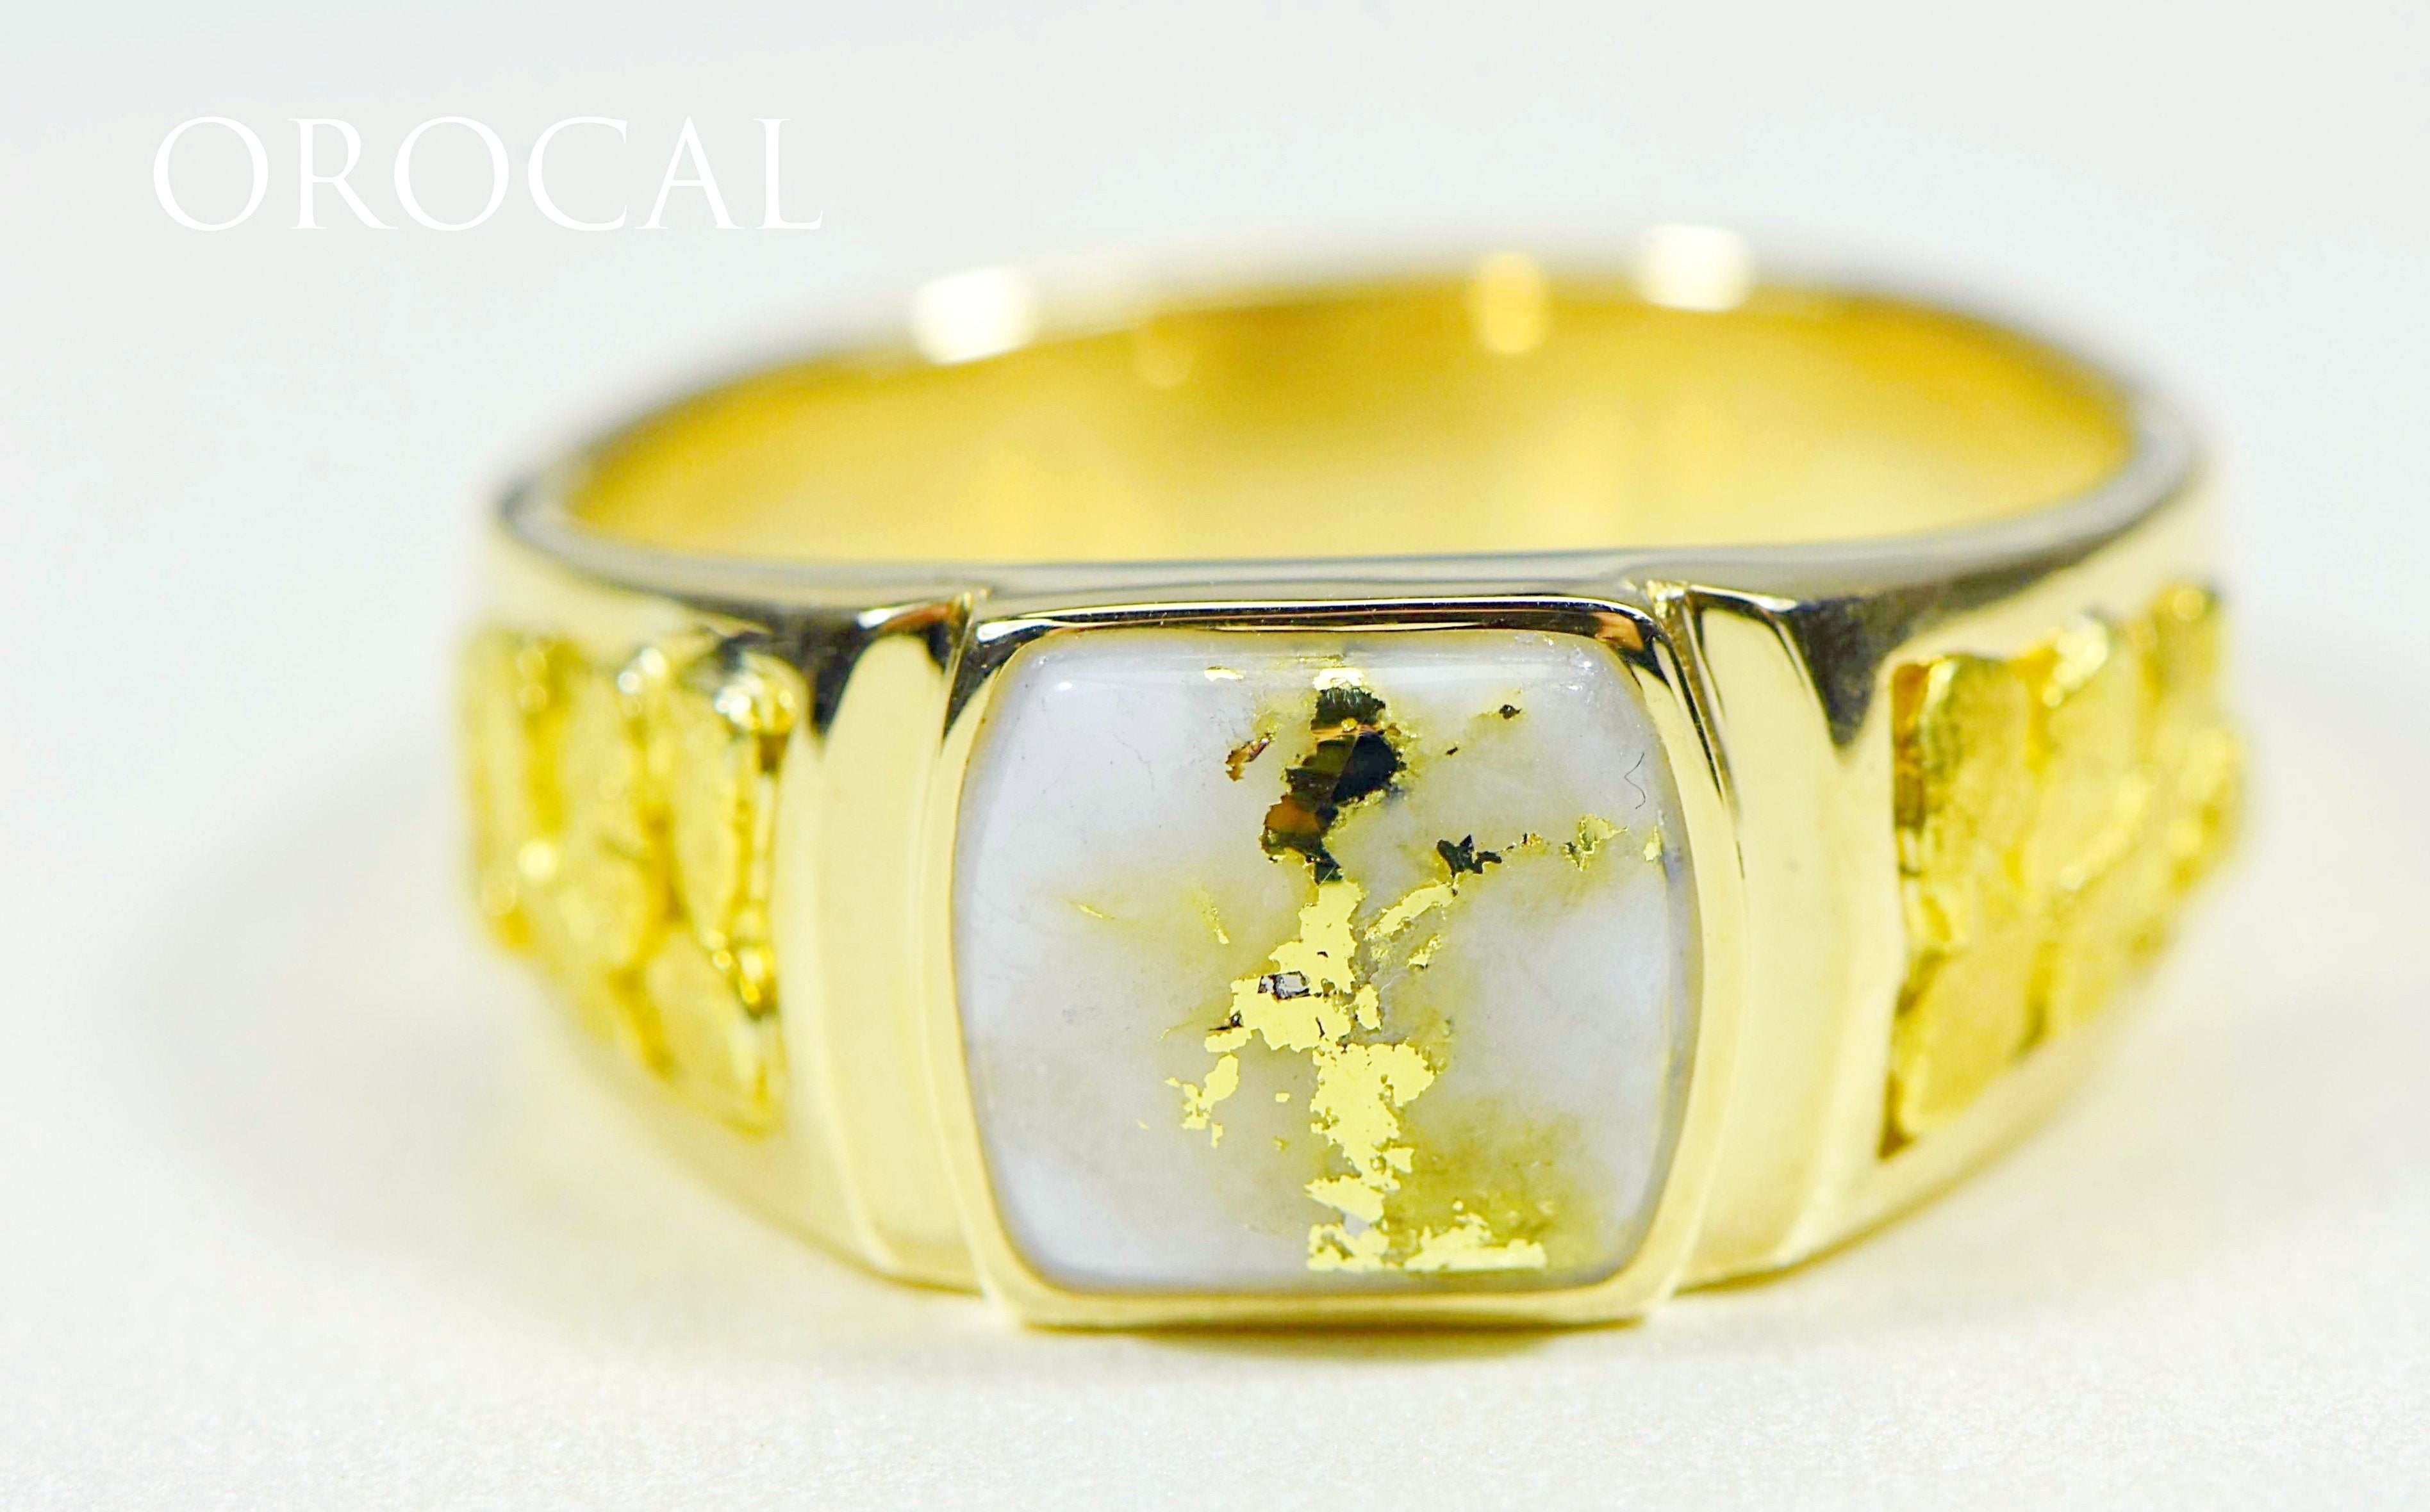 Gold Quartz Ring "Orocal" RLL1075NQ Genuine Hand Crafted Jewelry - 14K Gold Casting